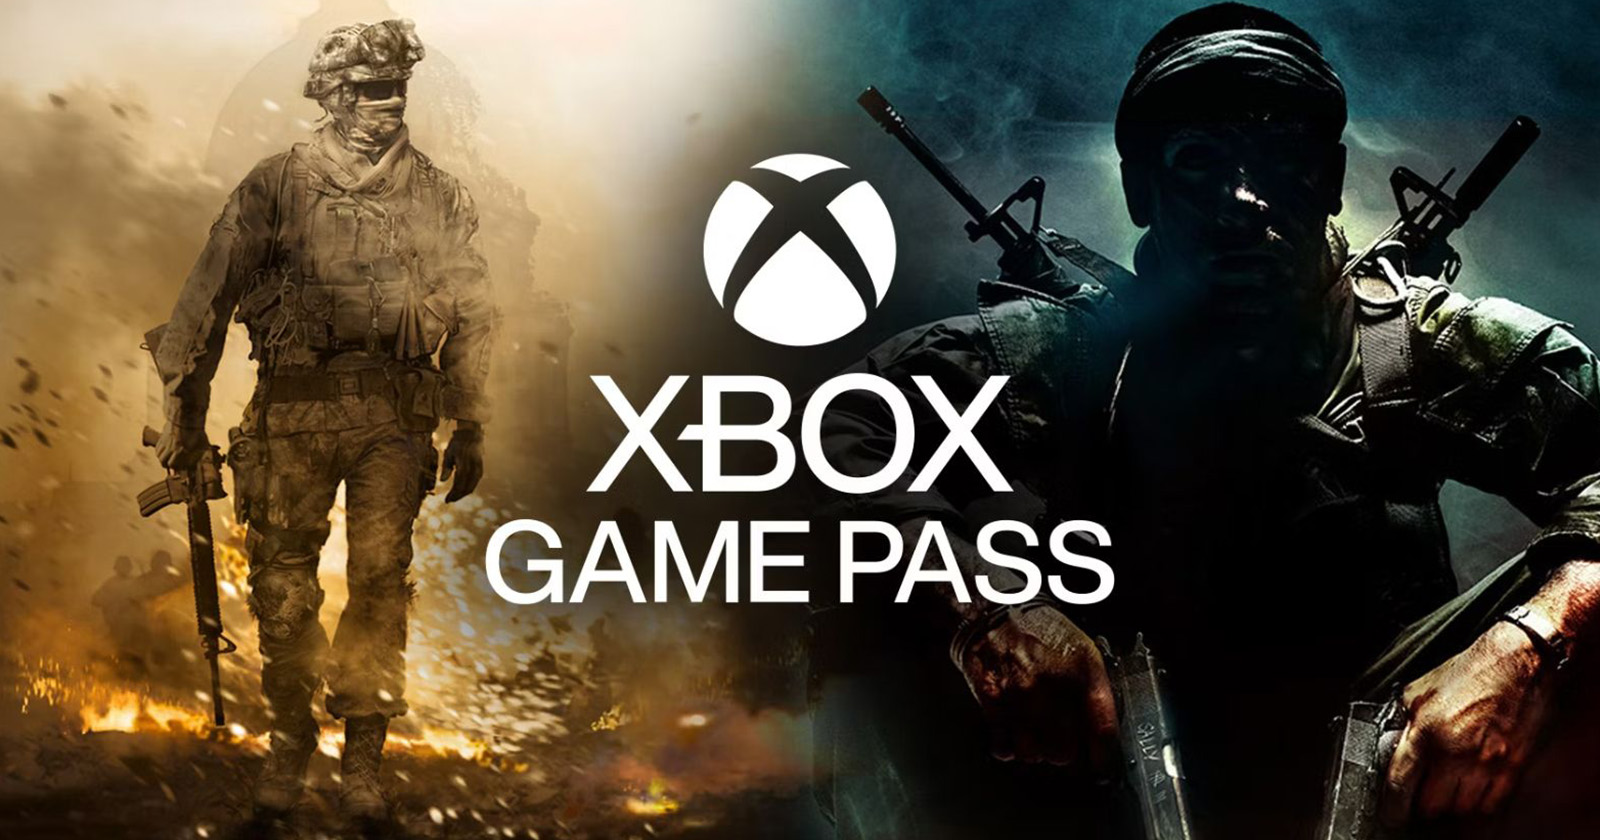 Call of Duty is coming to Xbox Game Pass with a price hike!